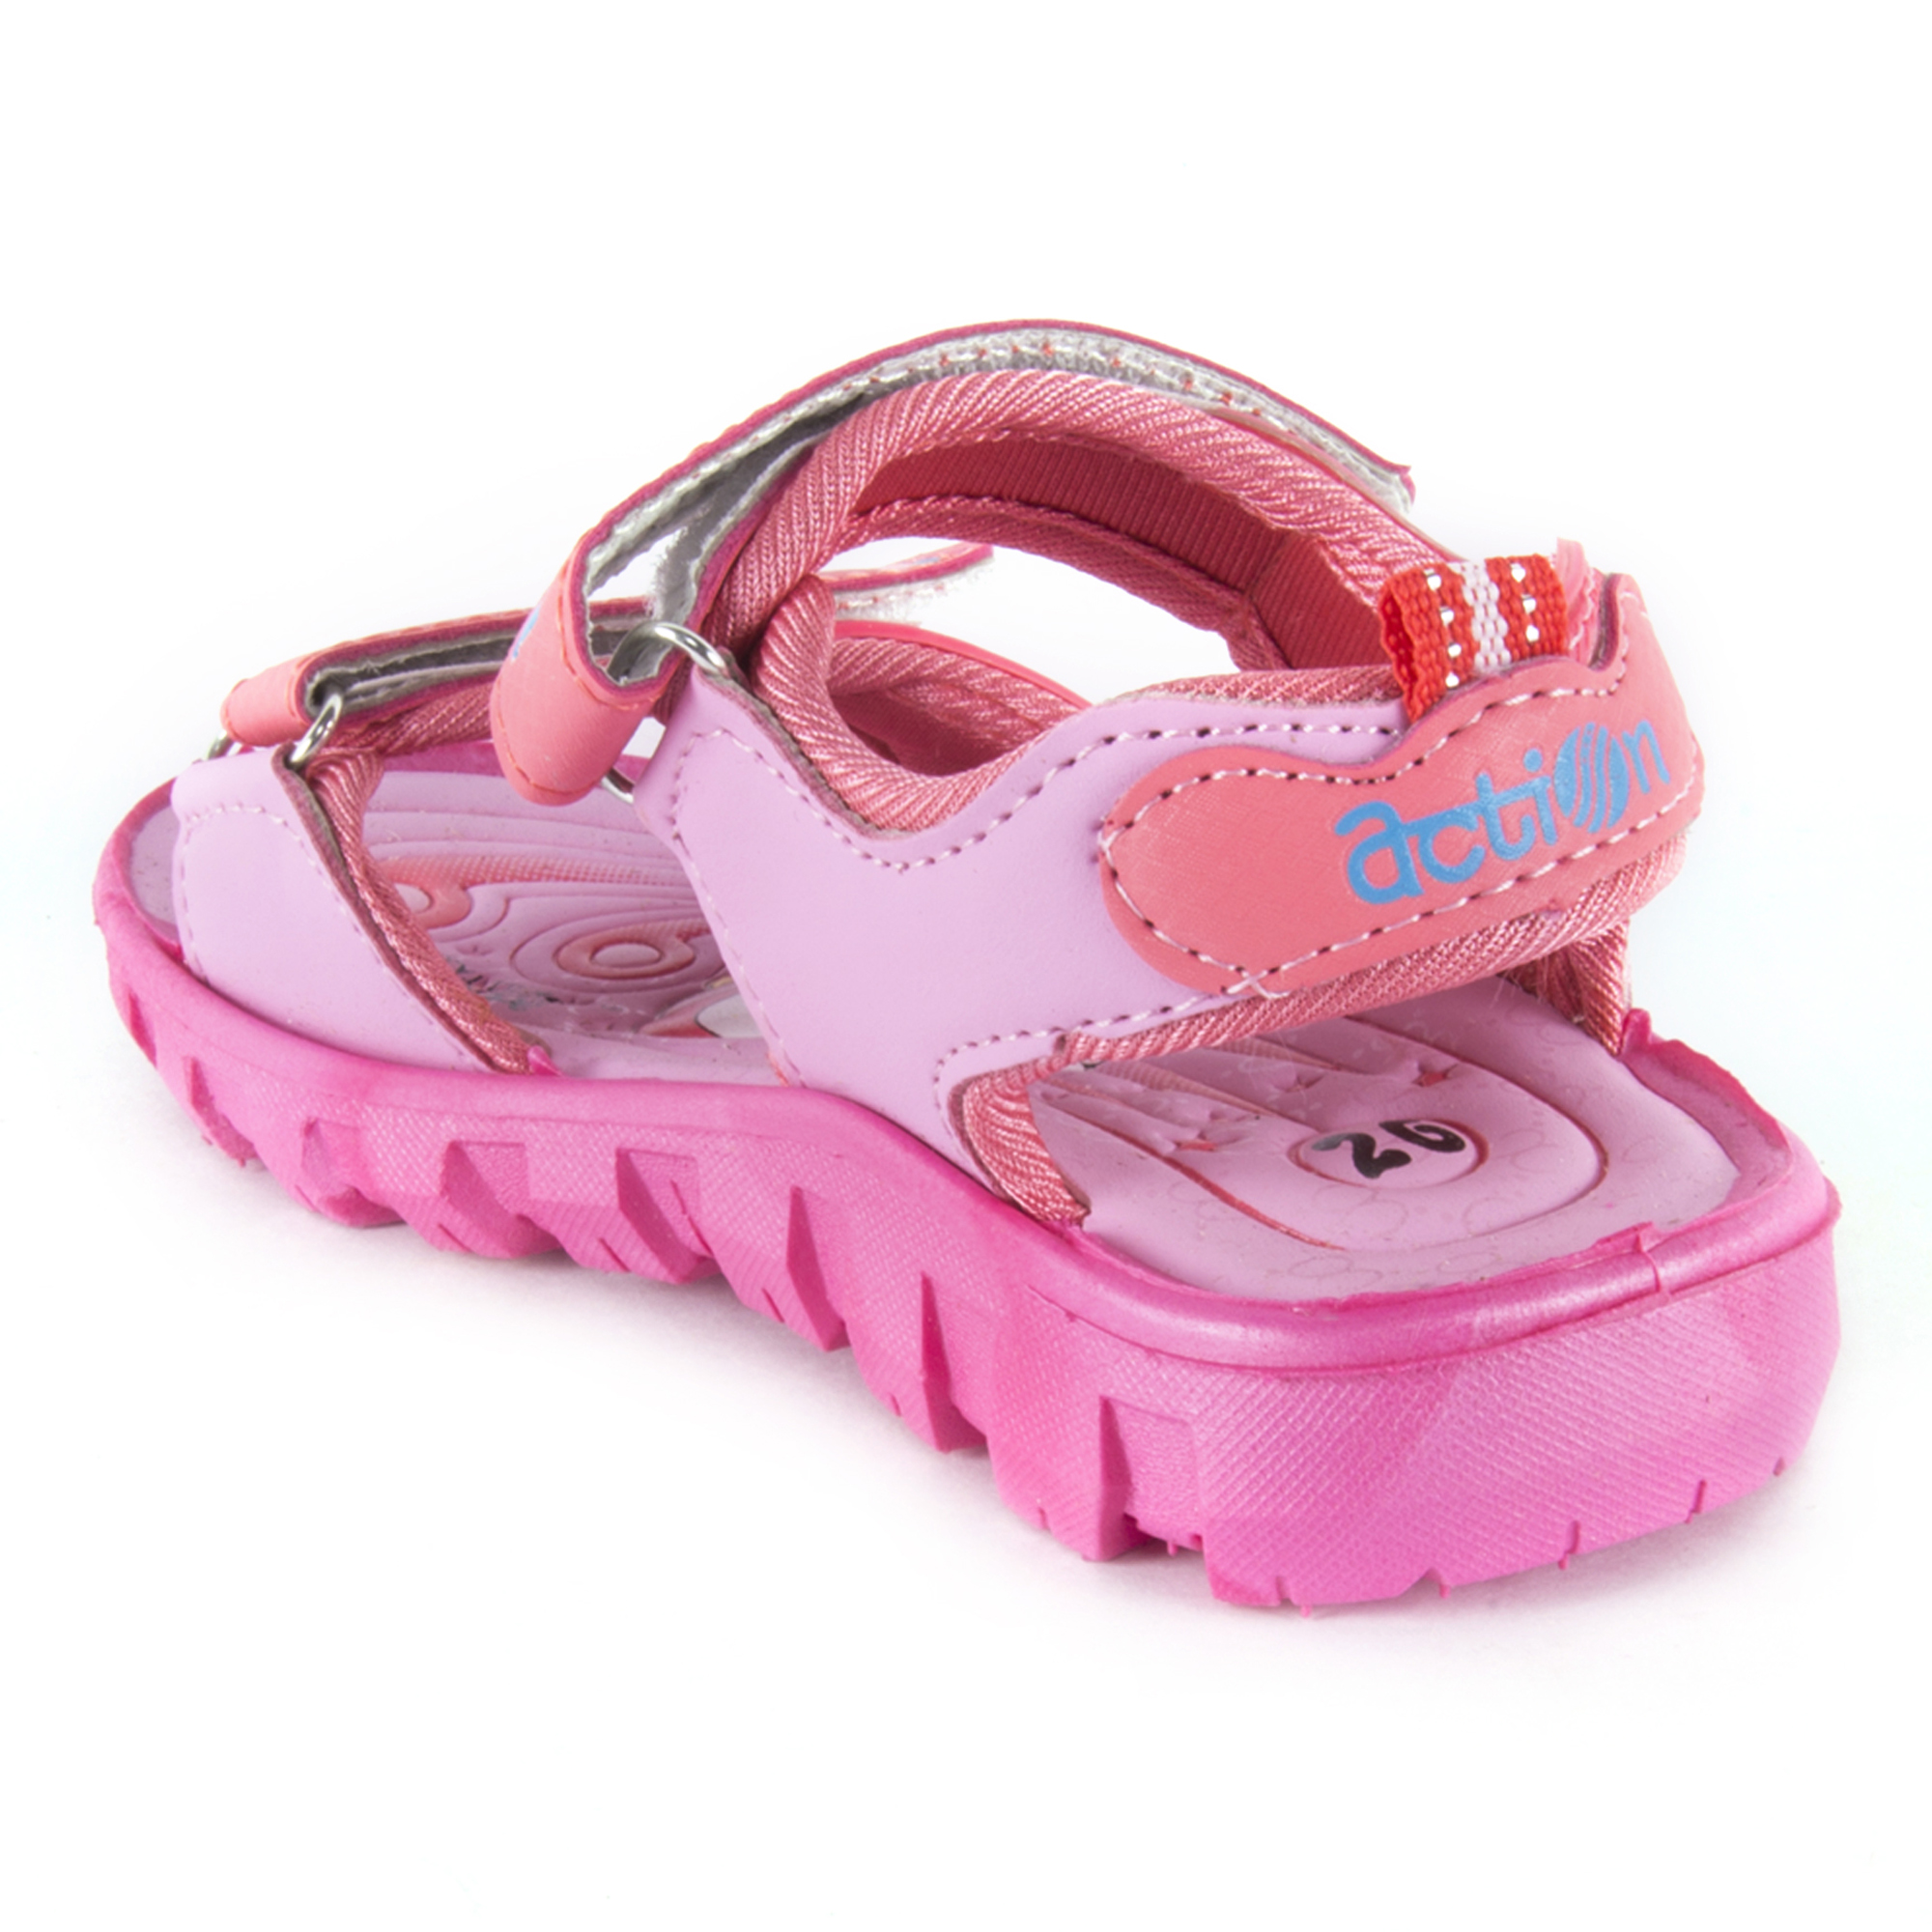 Buy ACTION SHOES DOTCOM KIDS SANDALS KS-123 PINK Online @ ₹369 from ...